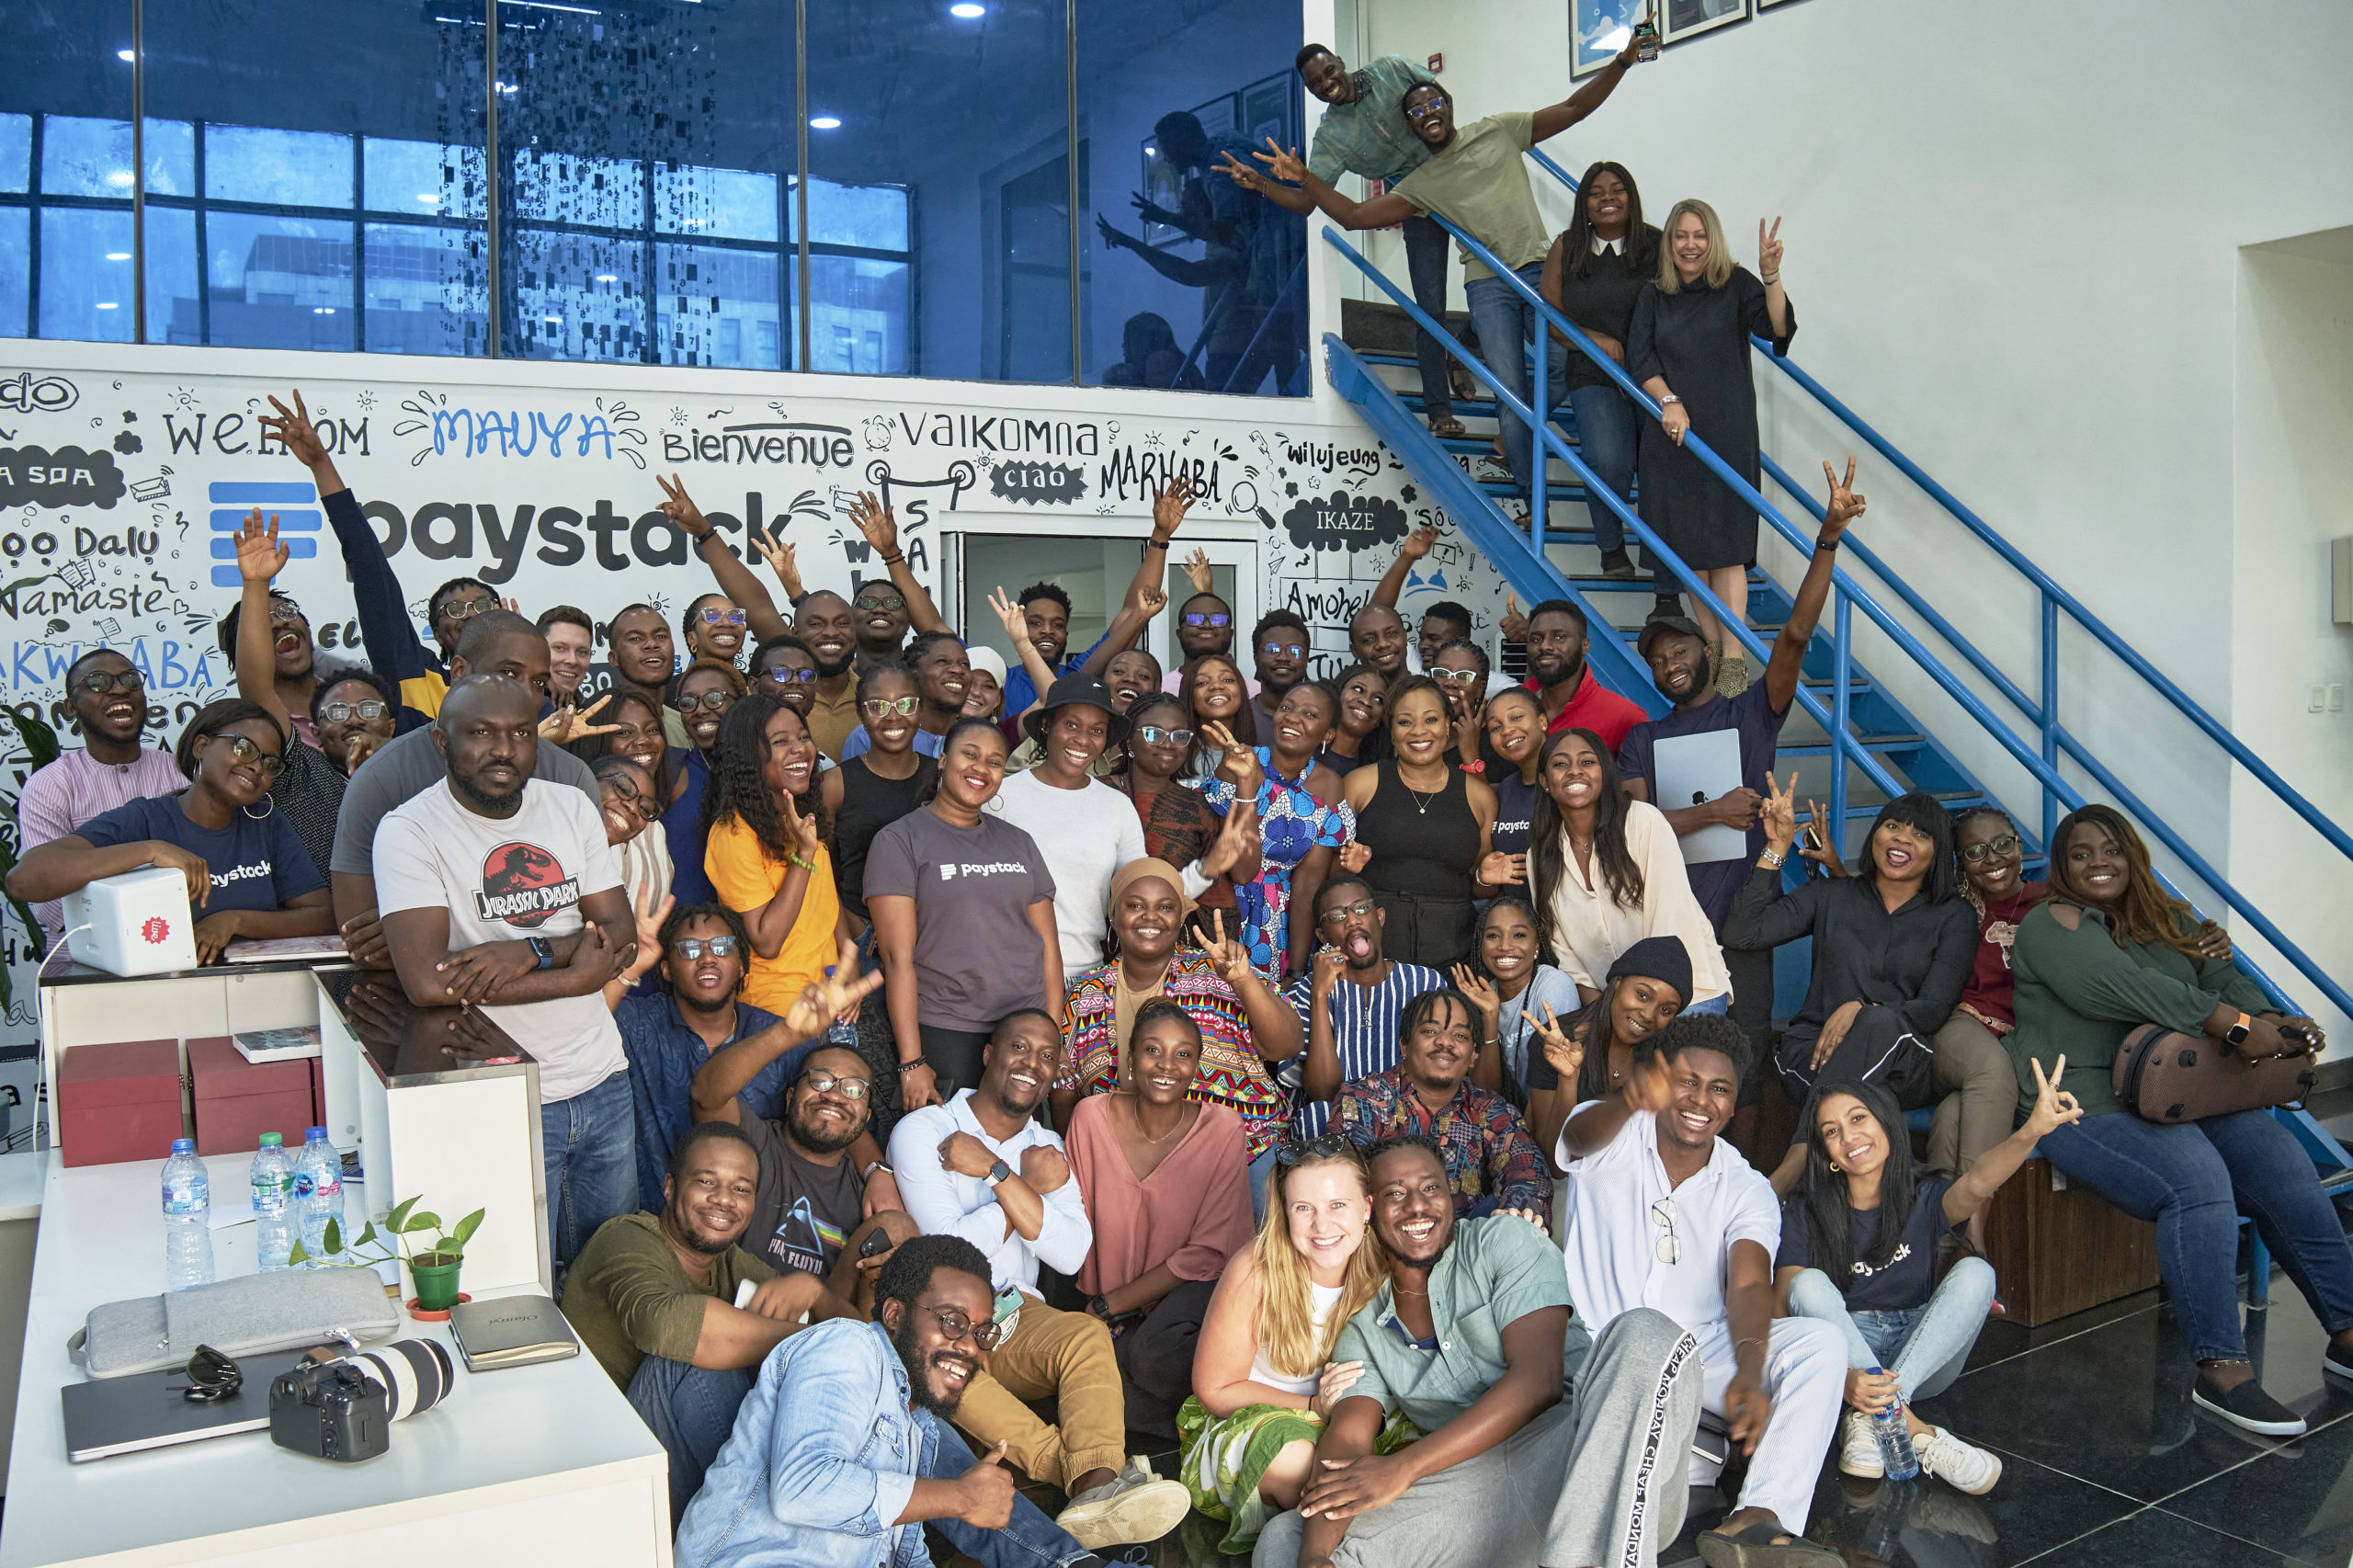 Two years post-acquisition, Paystack is increasing merchandise and gunning for roots in African markets